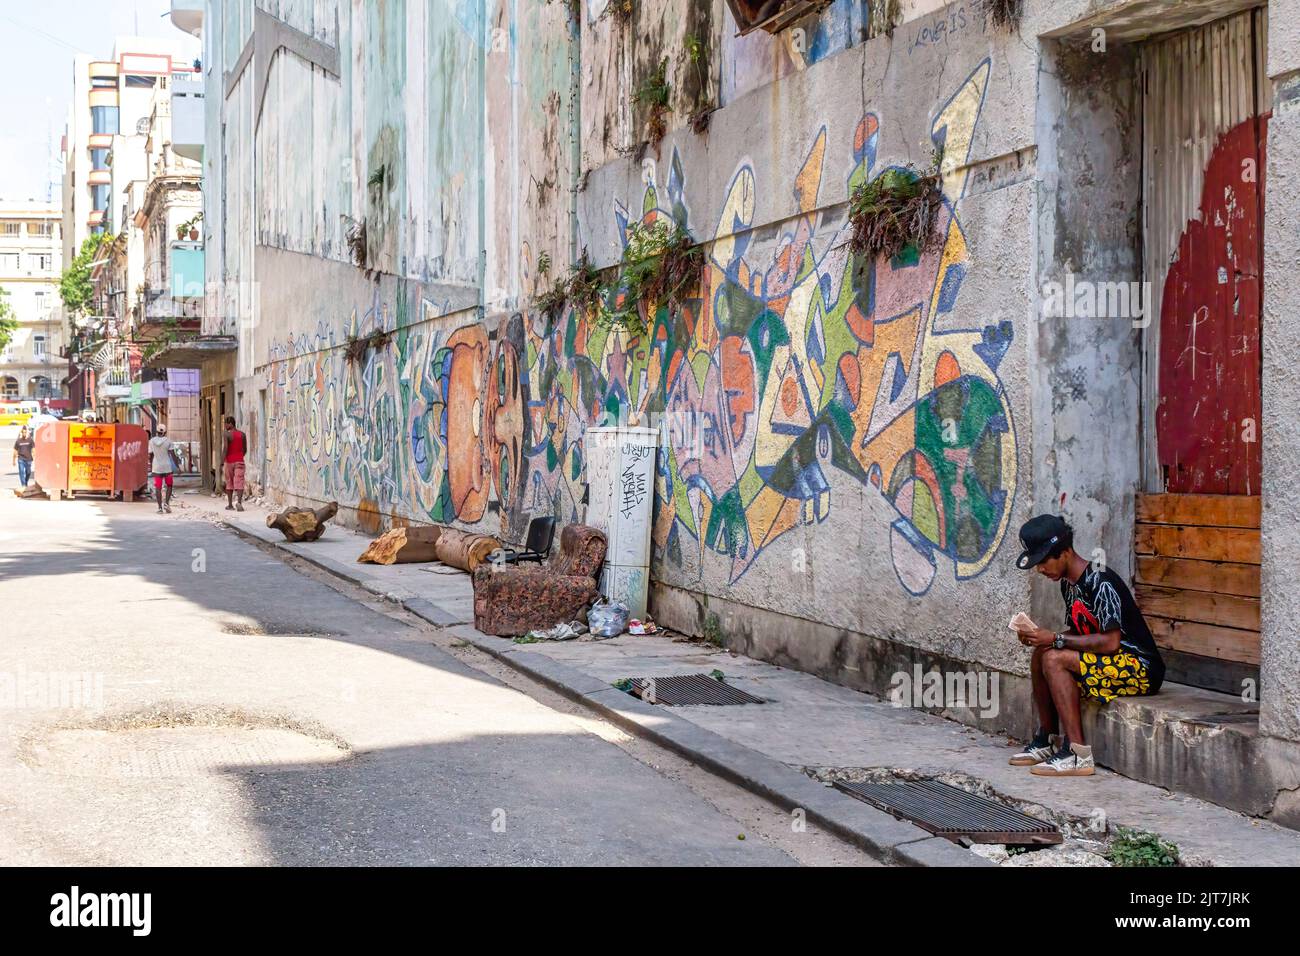 A Cuban man sits in a doorstep in a dirty and broken sidewalk. The building wall has urban graffiti. Stock Photo